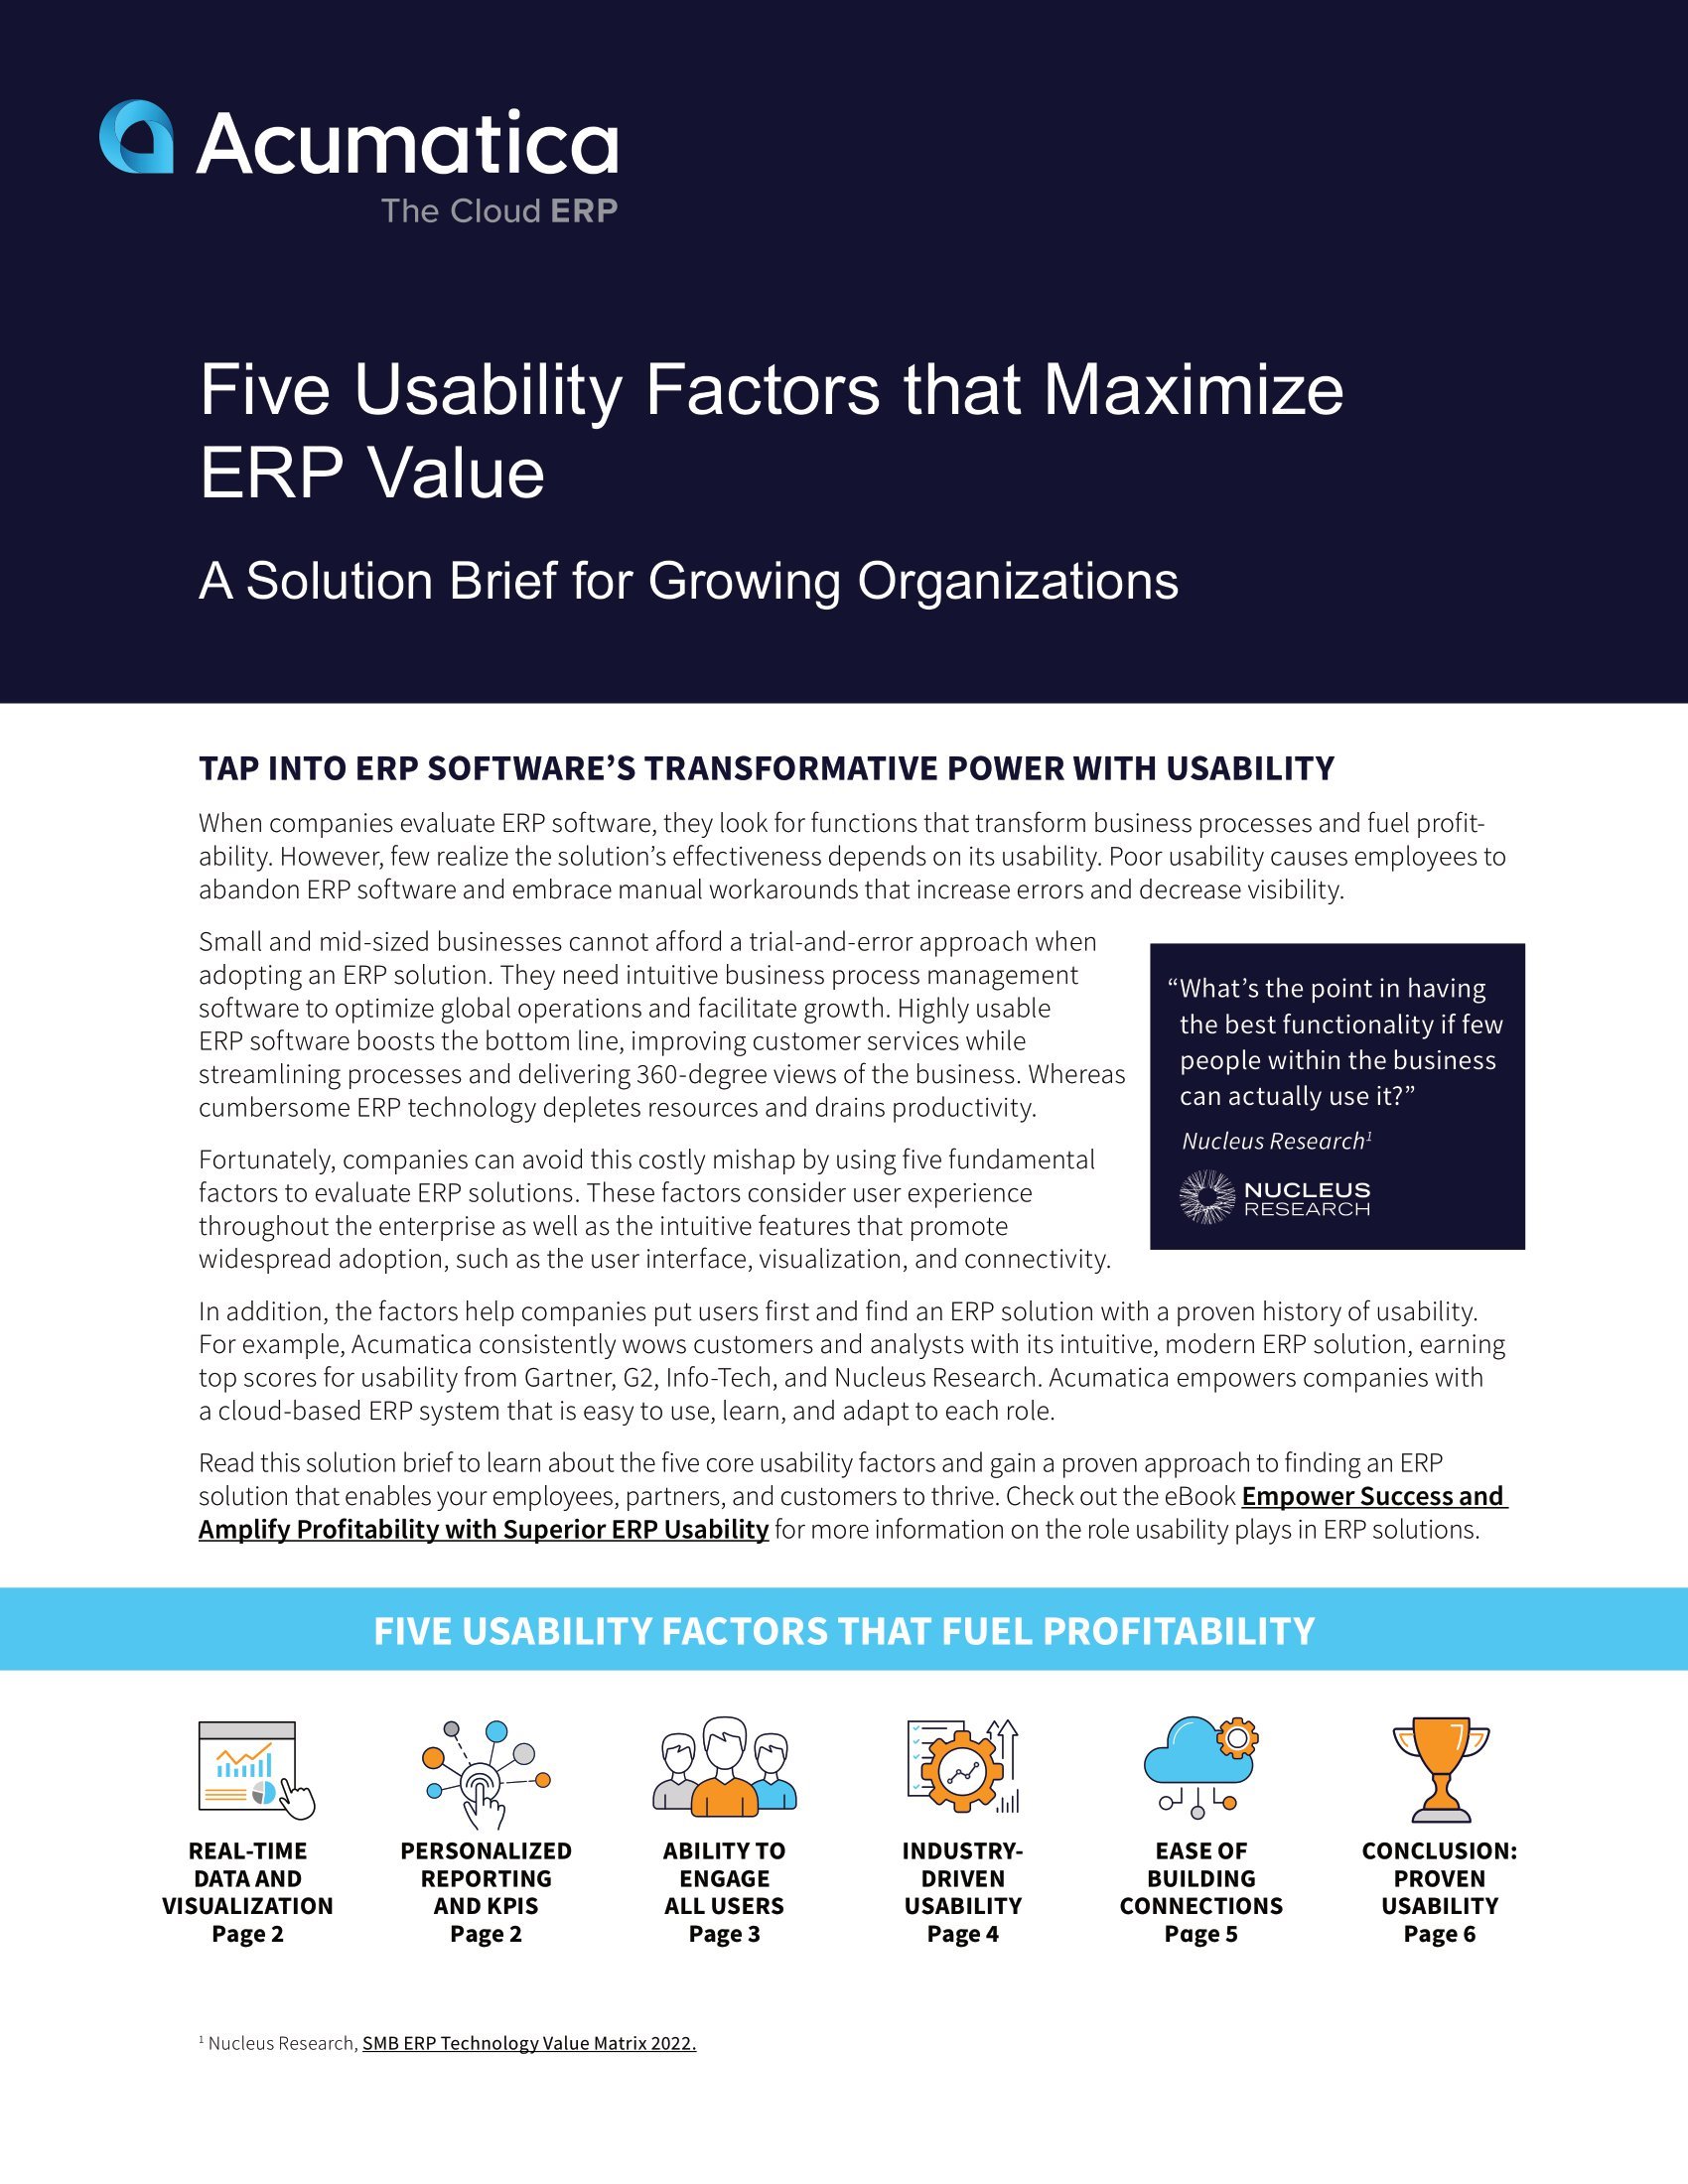 Discover the 5 ERP Usability Factors That Engage Users and Boost Profitability